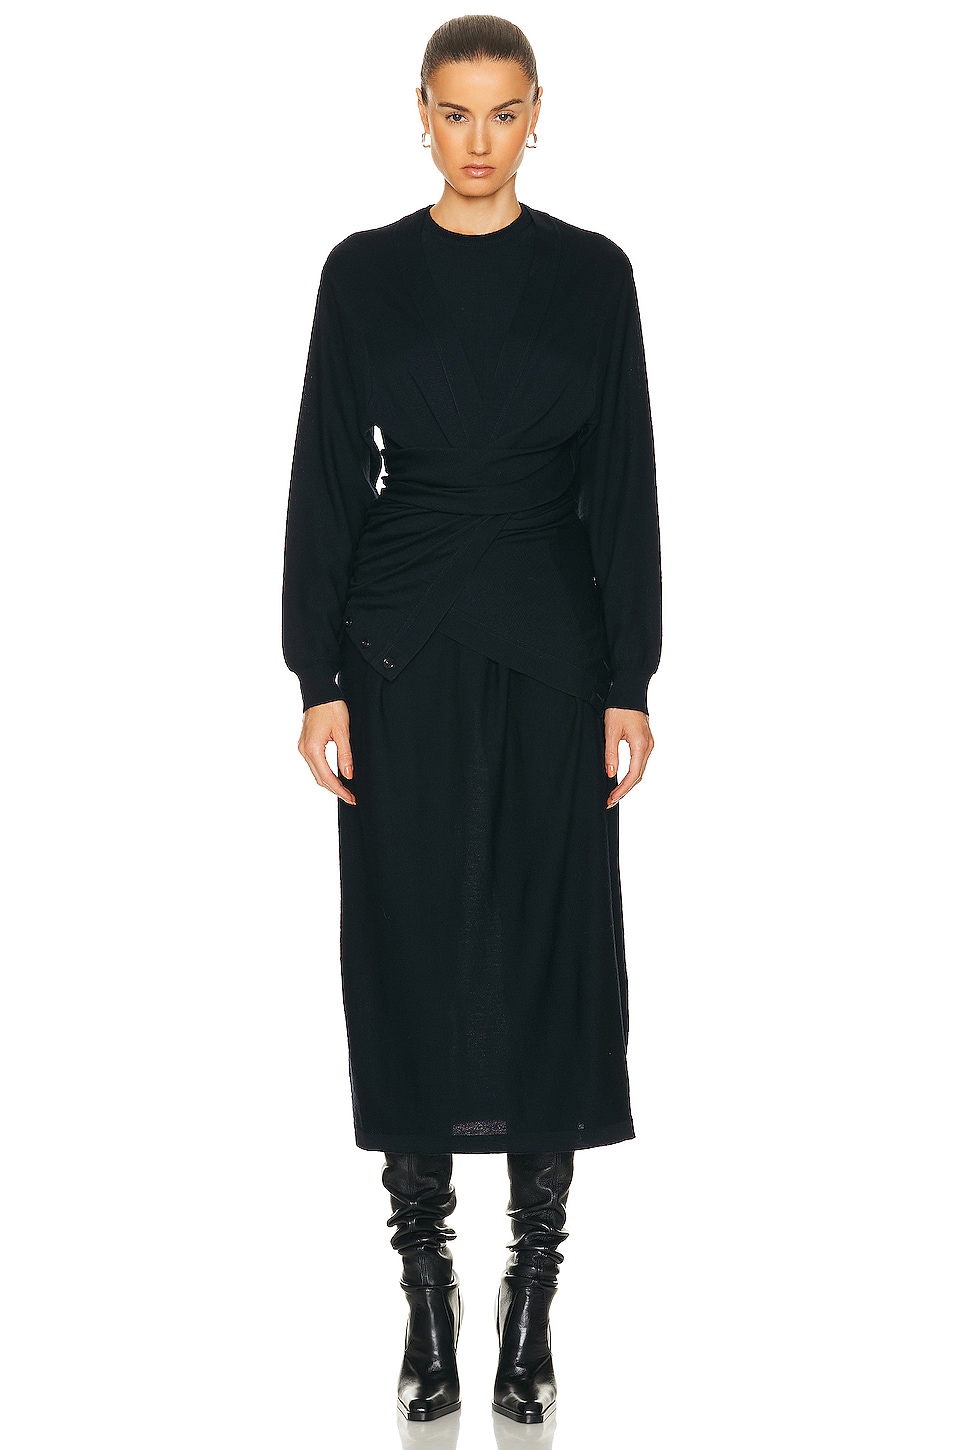 Image 1 of Lemaire Twisted Trompe L'oeil Dress in Dark Navy